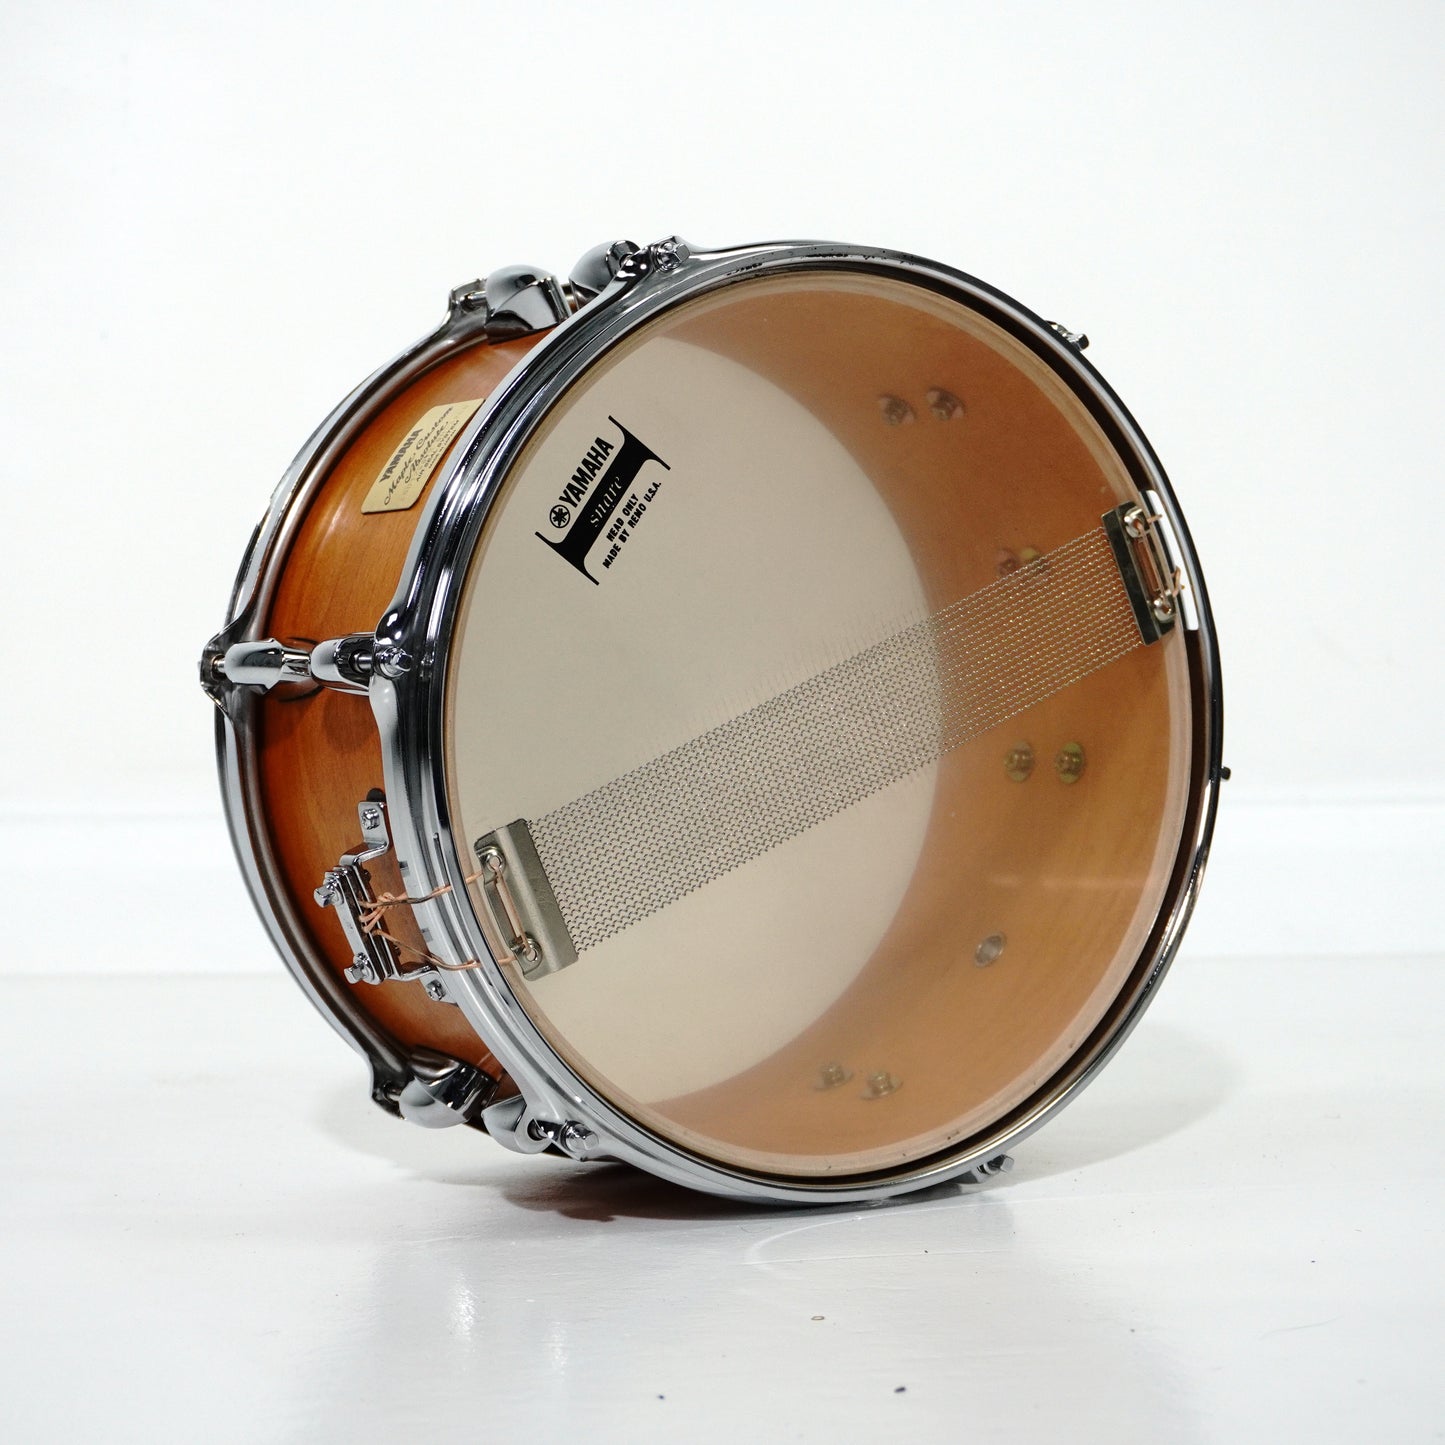 Yamaha 12” x 6” Maple Custom Absolute Snare Drum in Vintage Natural Finish